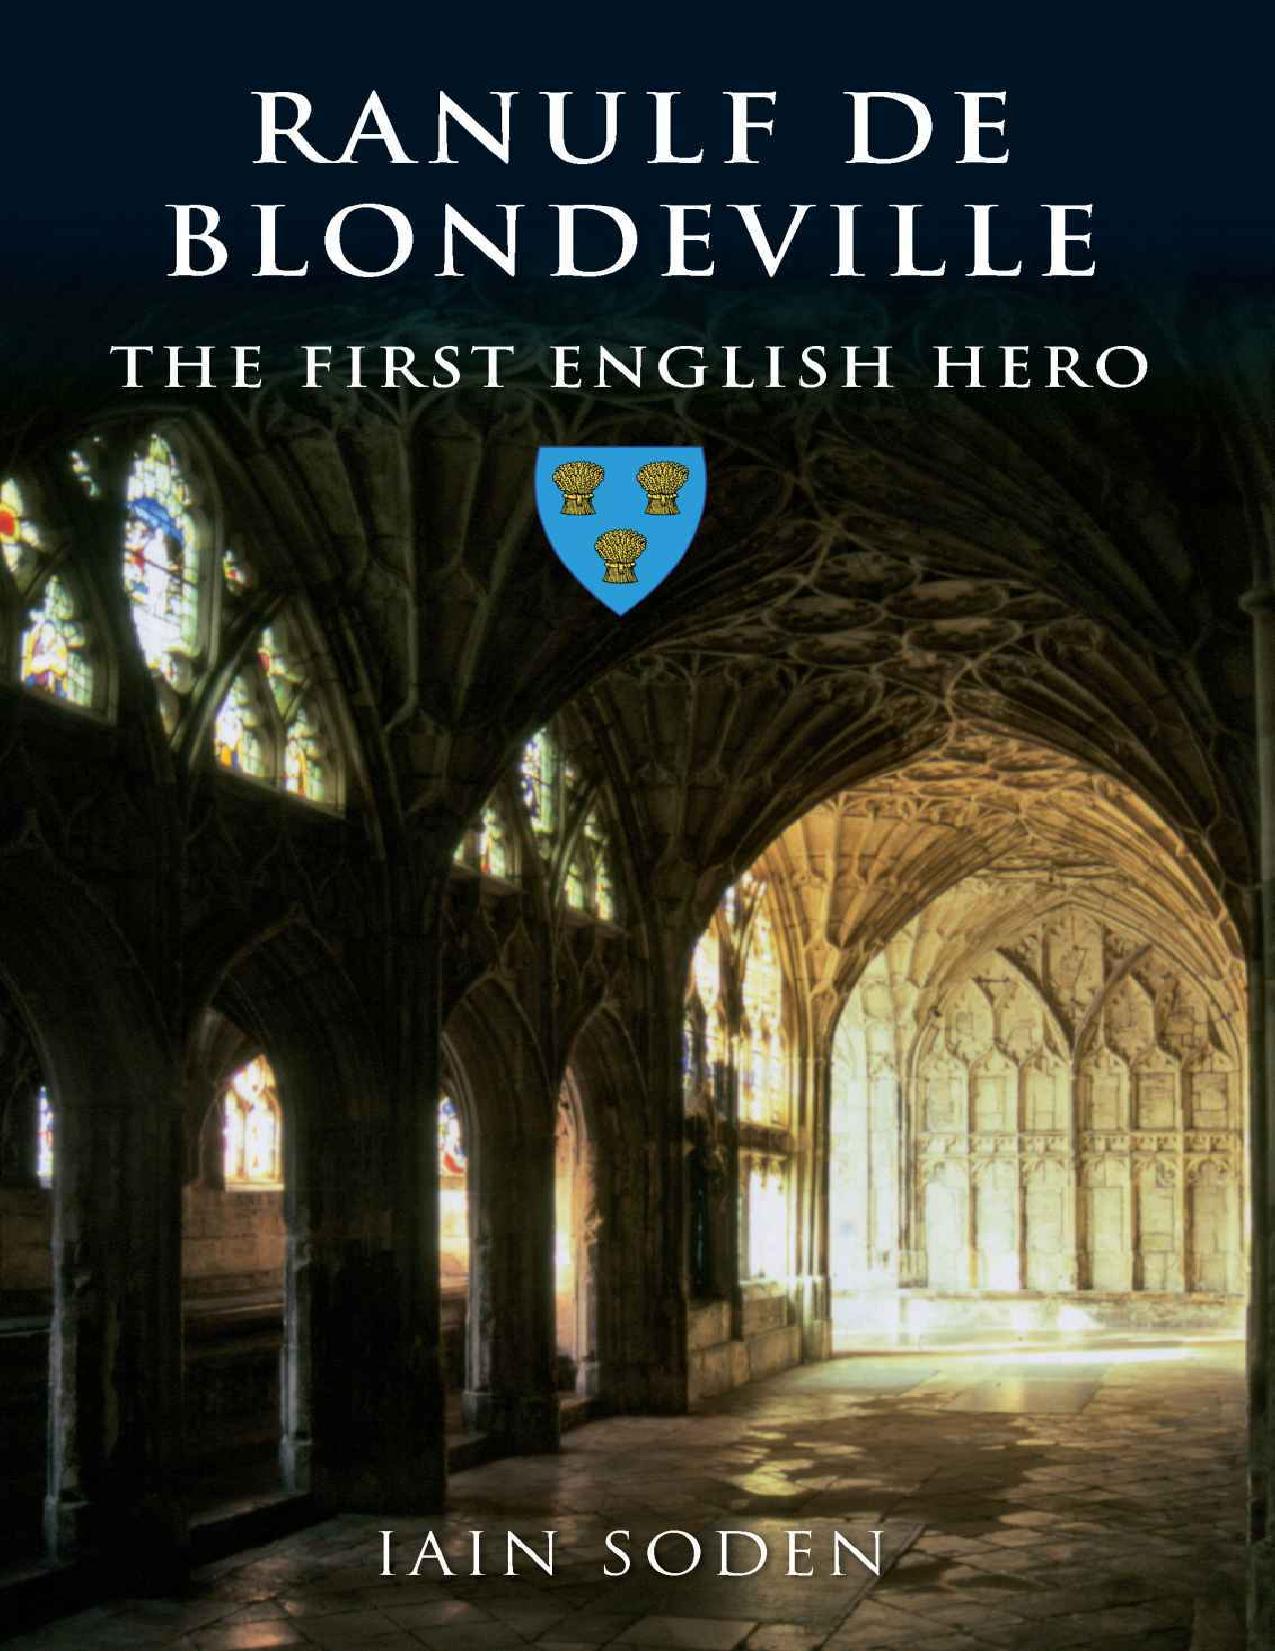 (eBook PDF)Ranulf de Blondeville: The First English Hero by Iain Soden